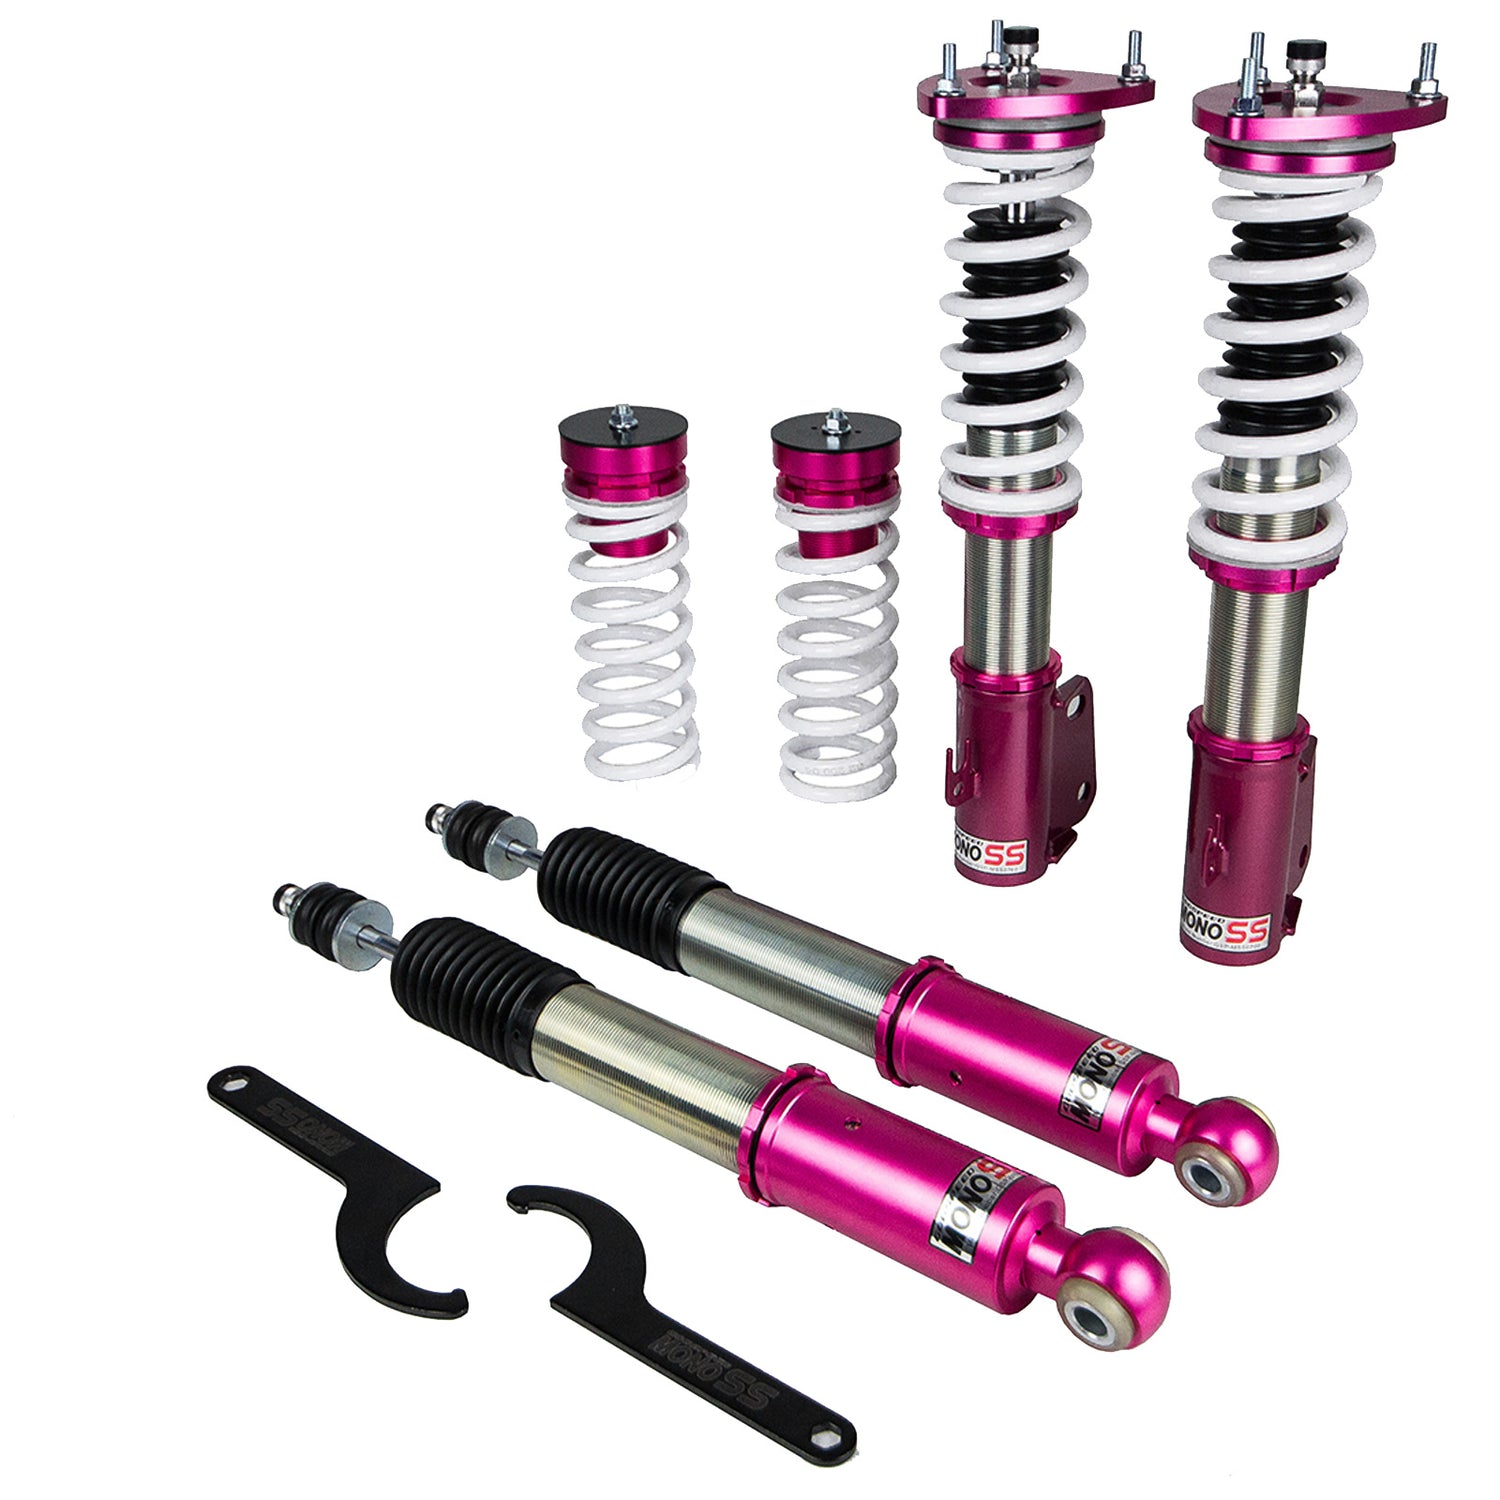 Godspeed MSS0760-B MonoSS Coilover Lowering Kit, Fully Adjustable, Ride Height, Spring Tension And 16 Click Damping, Scion XA(NCP31) 2004-06